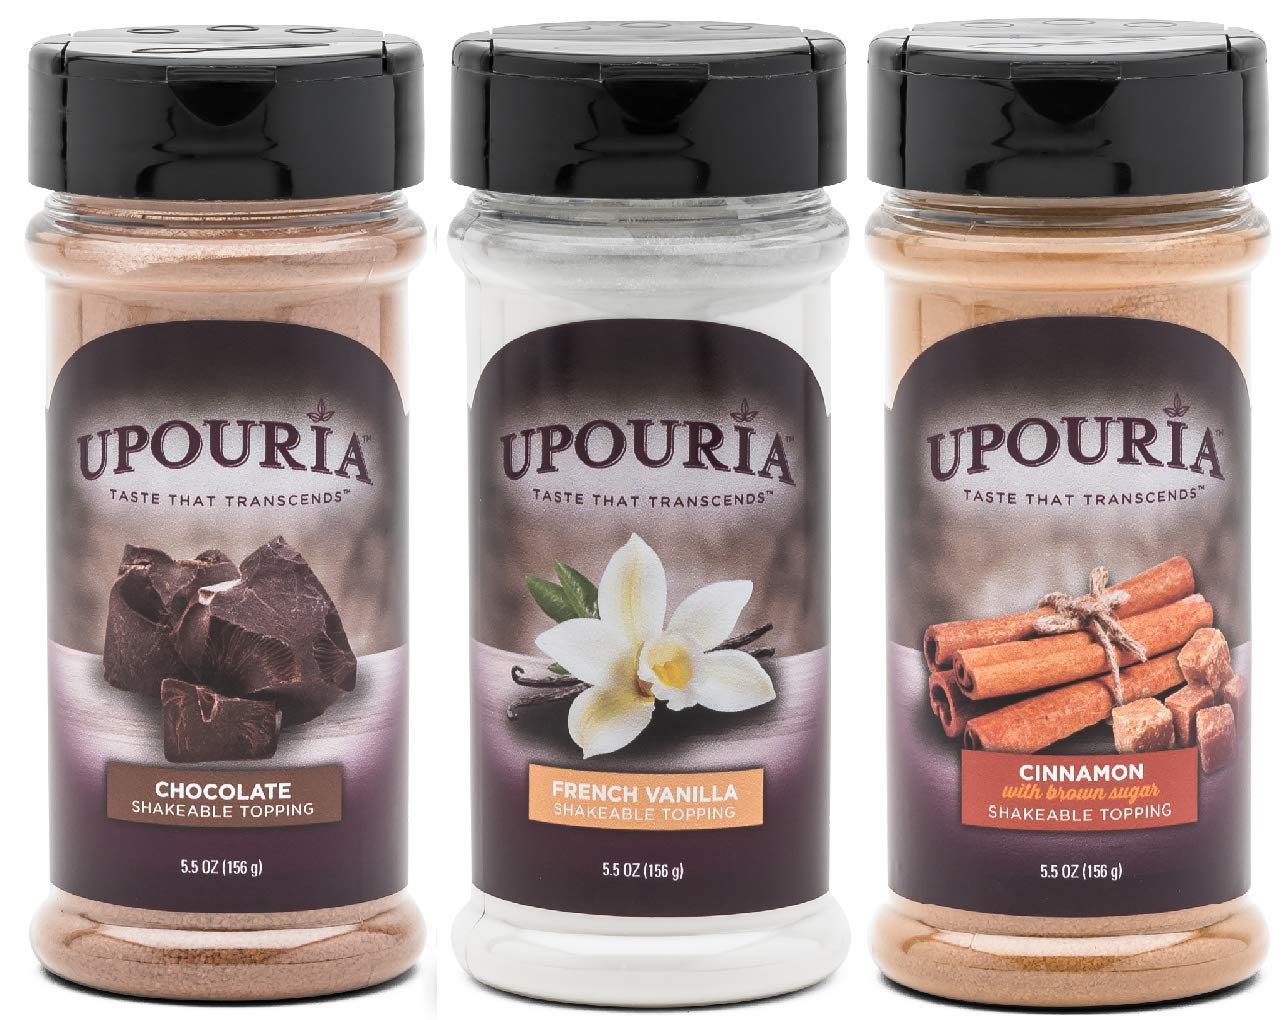 Upouria Coffee Topping Variety Pack - Chocolate, Cinnamon with Brown Sugar, and French Vanilla, 5.5 Ounce Shakeable Topping Jars - (Pack of 3)